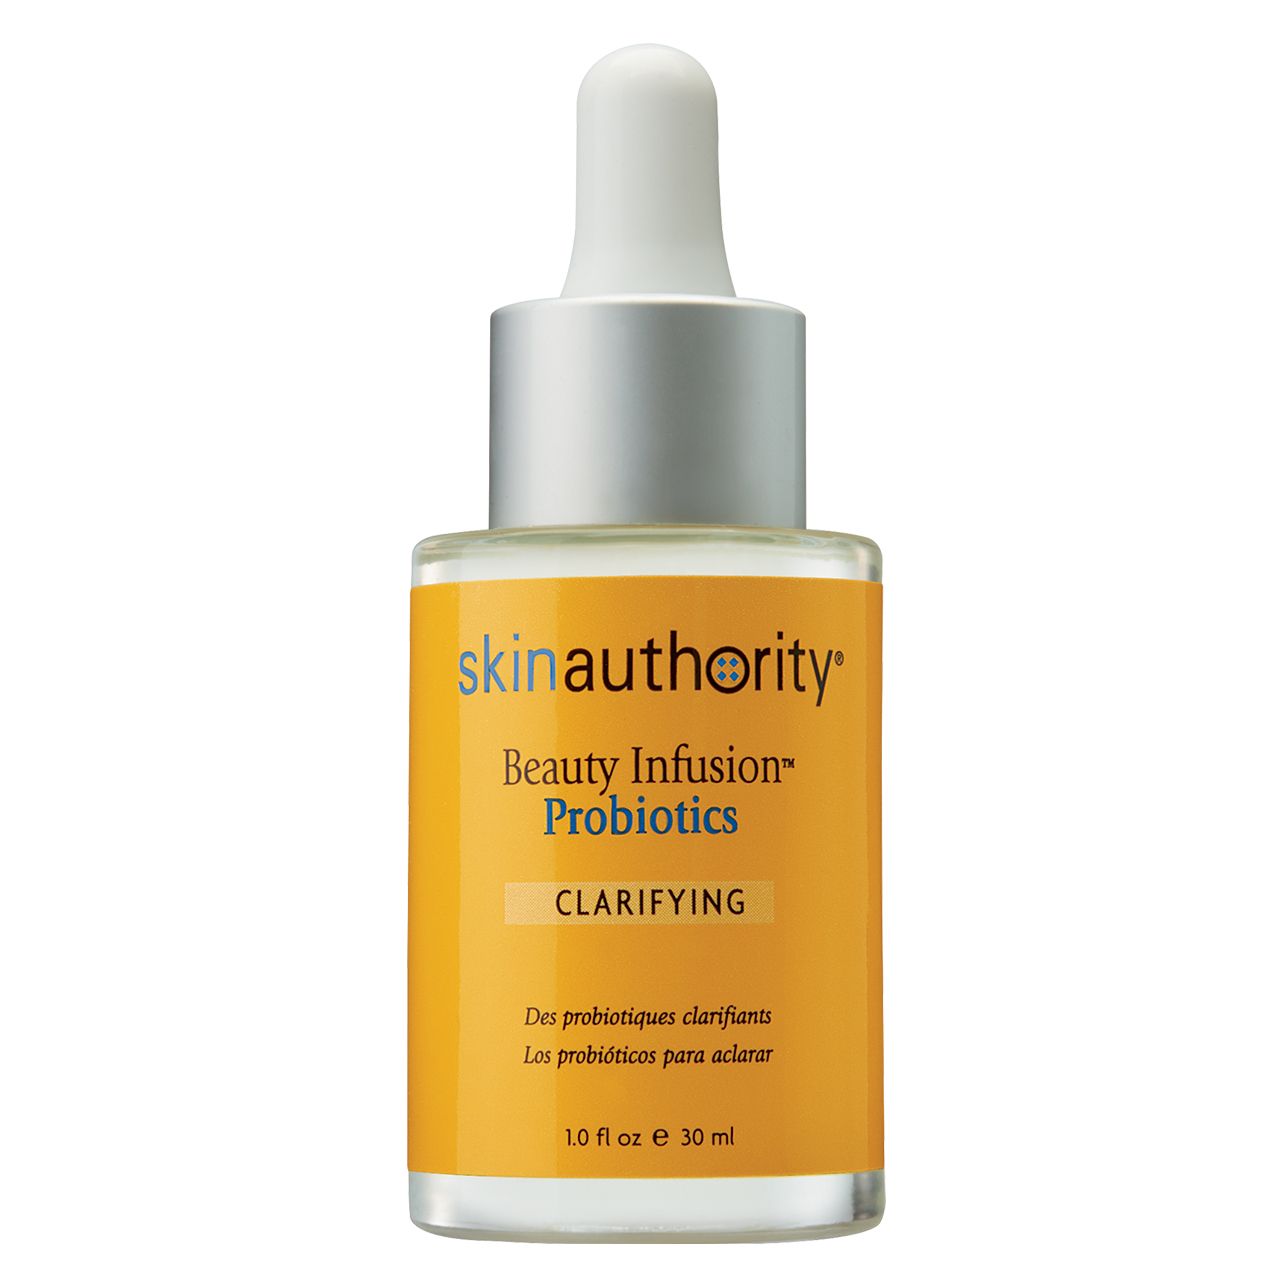 Beauty Infusion Probiotics for Clarifying | Skin Authority